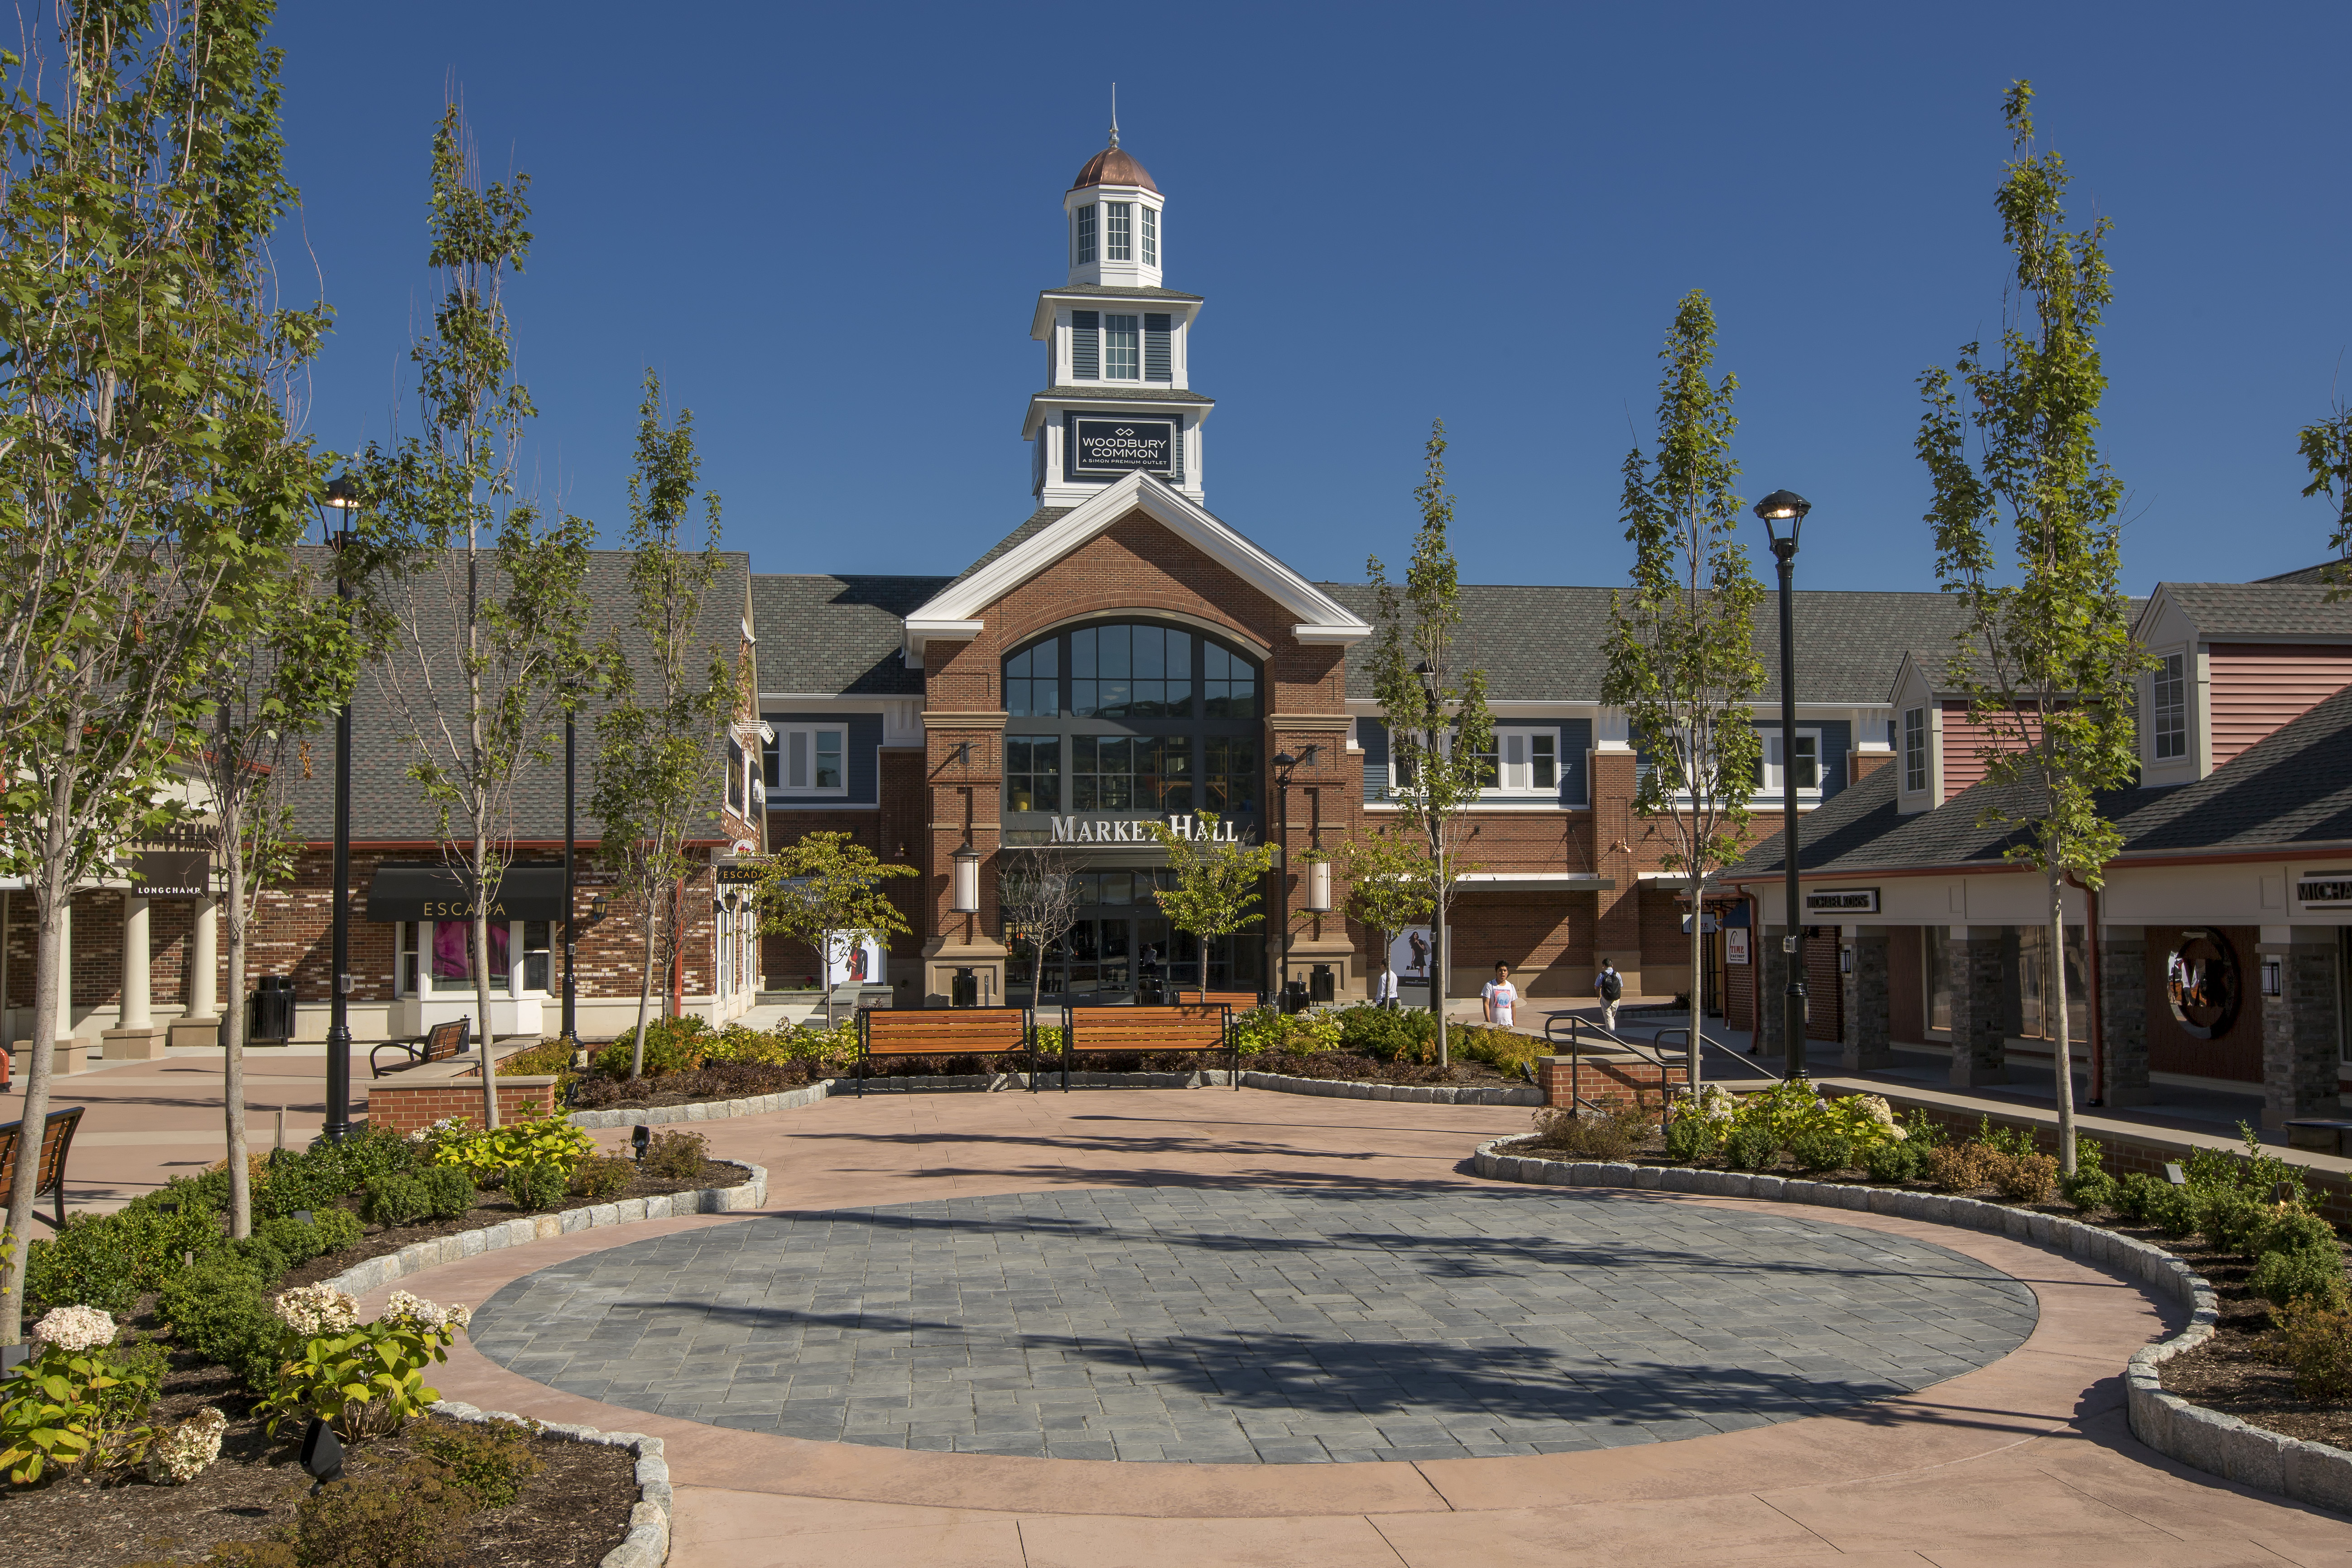 From NYC: Woodbury Common Premium Outlets Shopping Tour